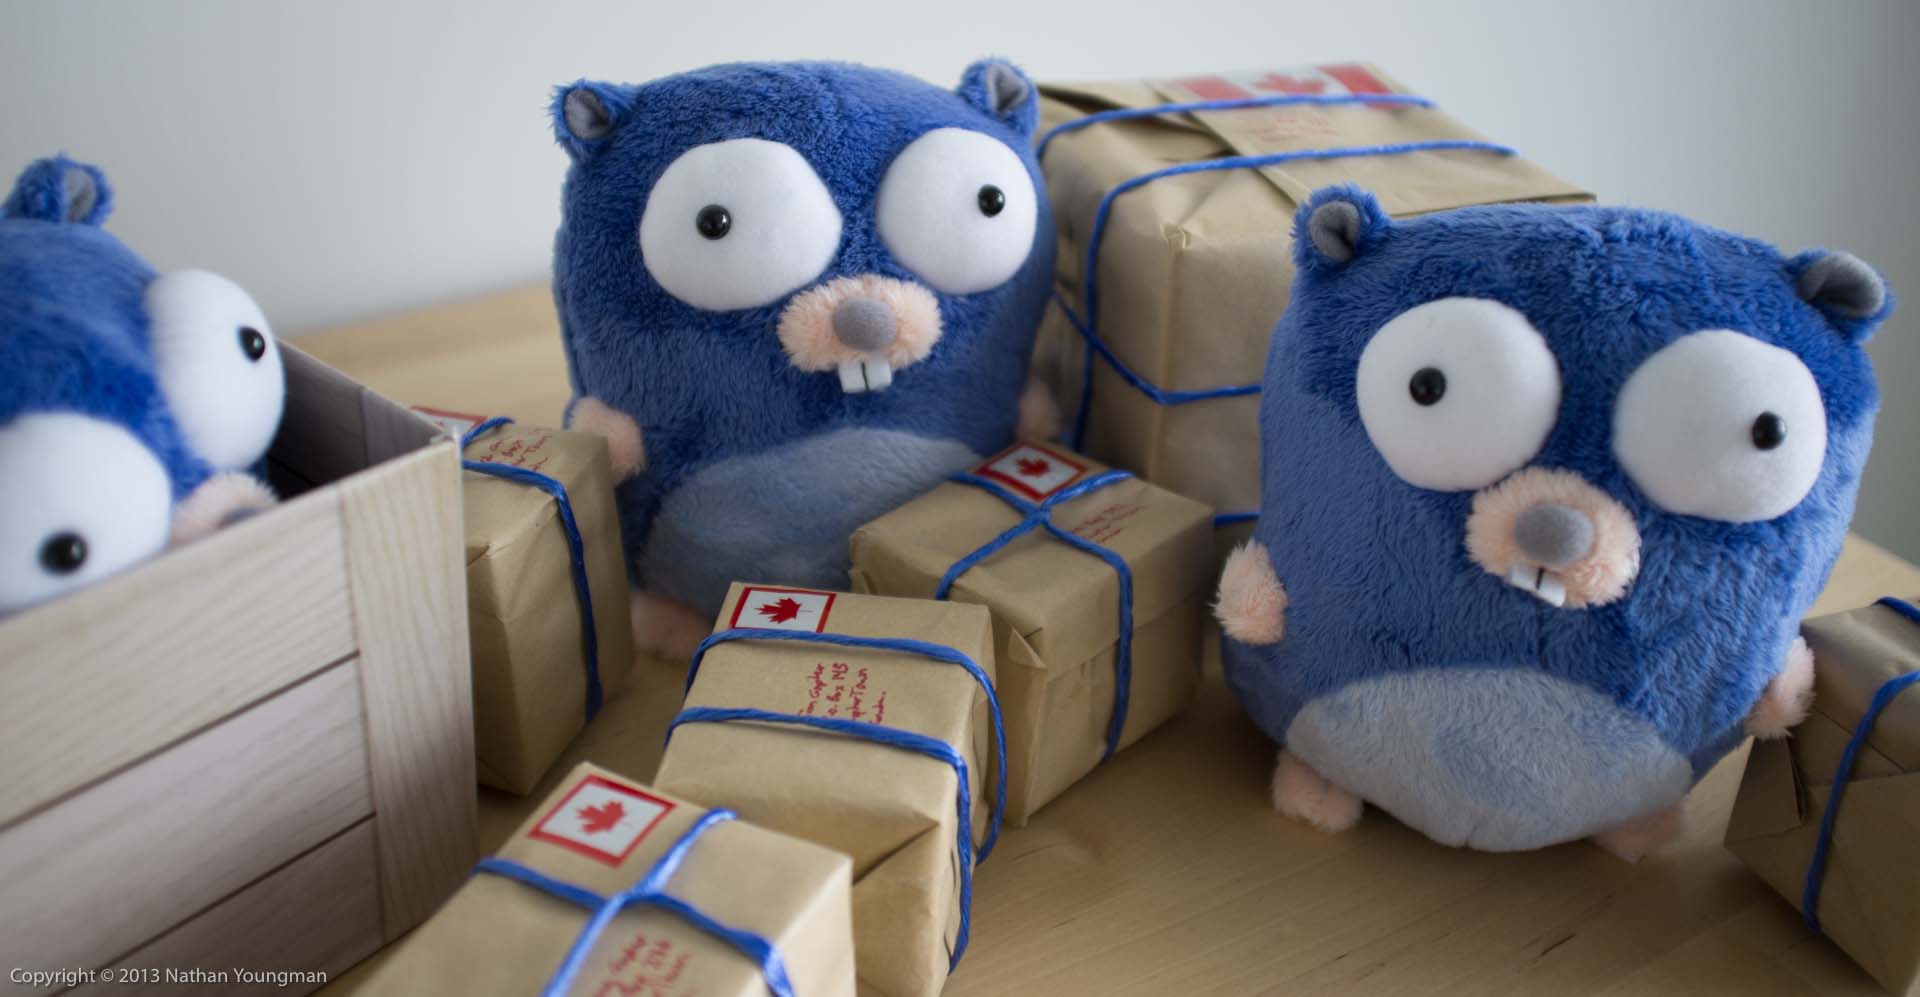 Gophers with parcels